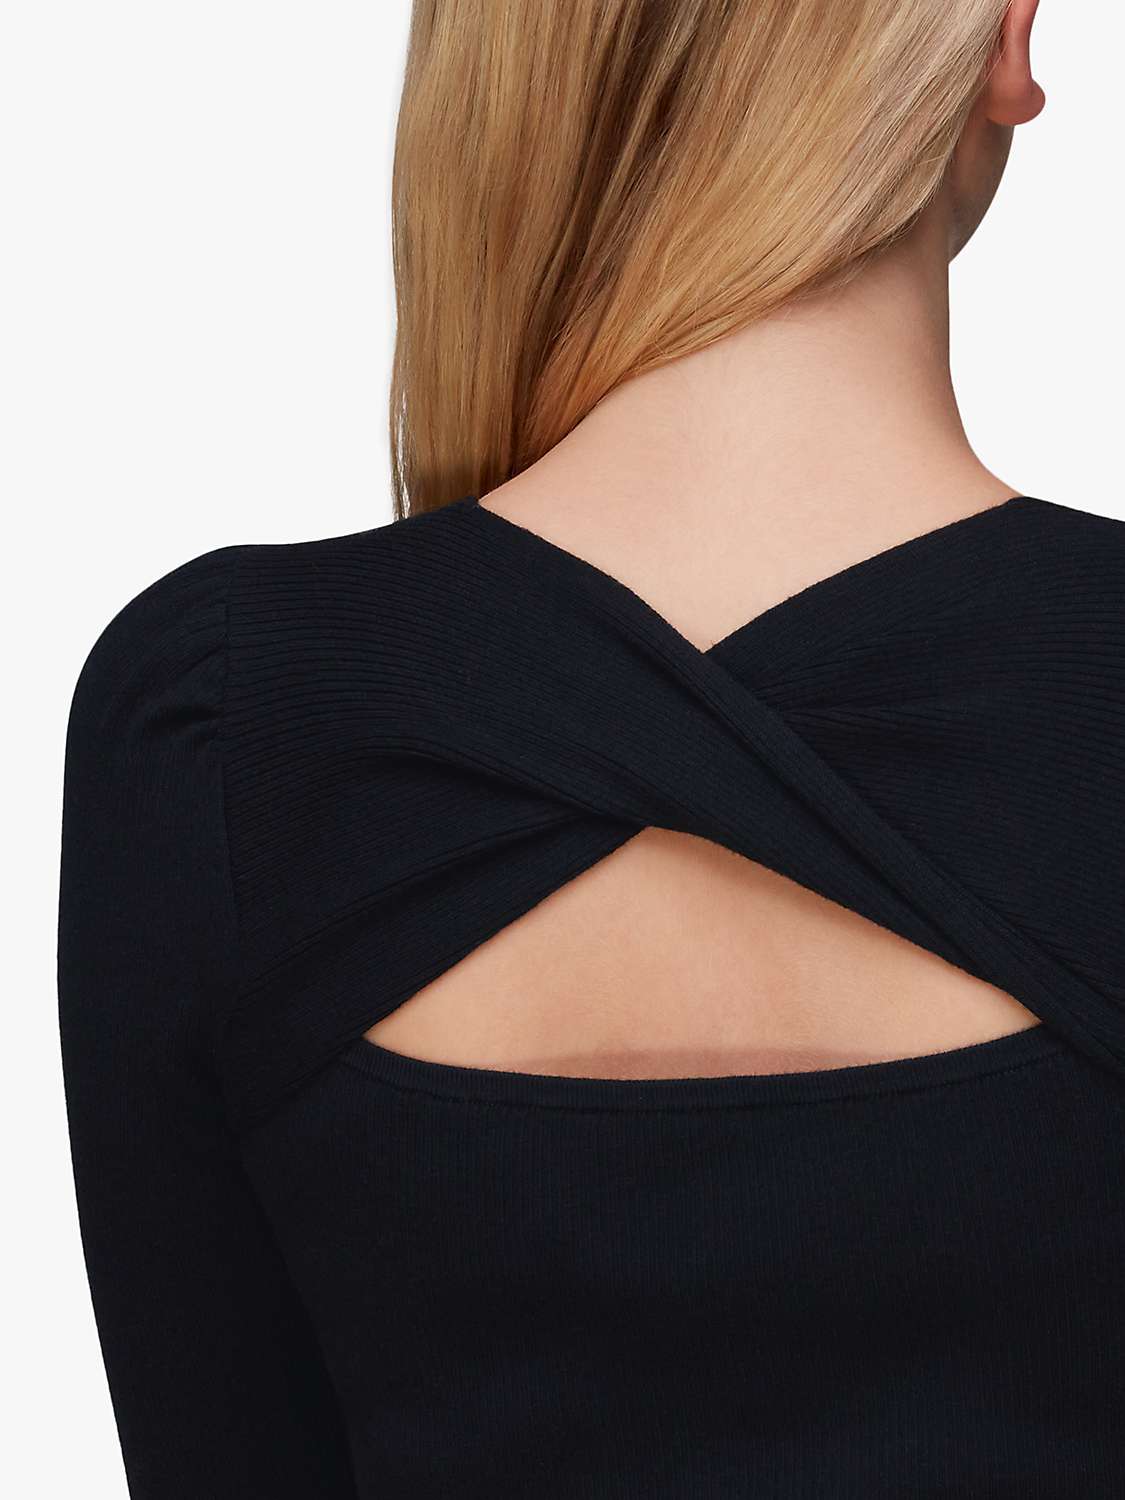 Buy Whistles Cut Out Twist Knitted Dress, Black Online at johnlewis.com